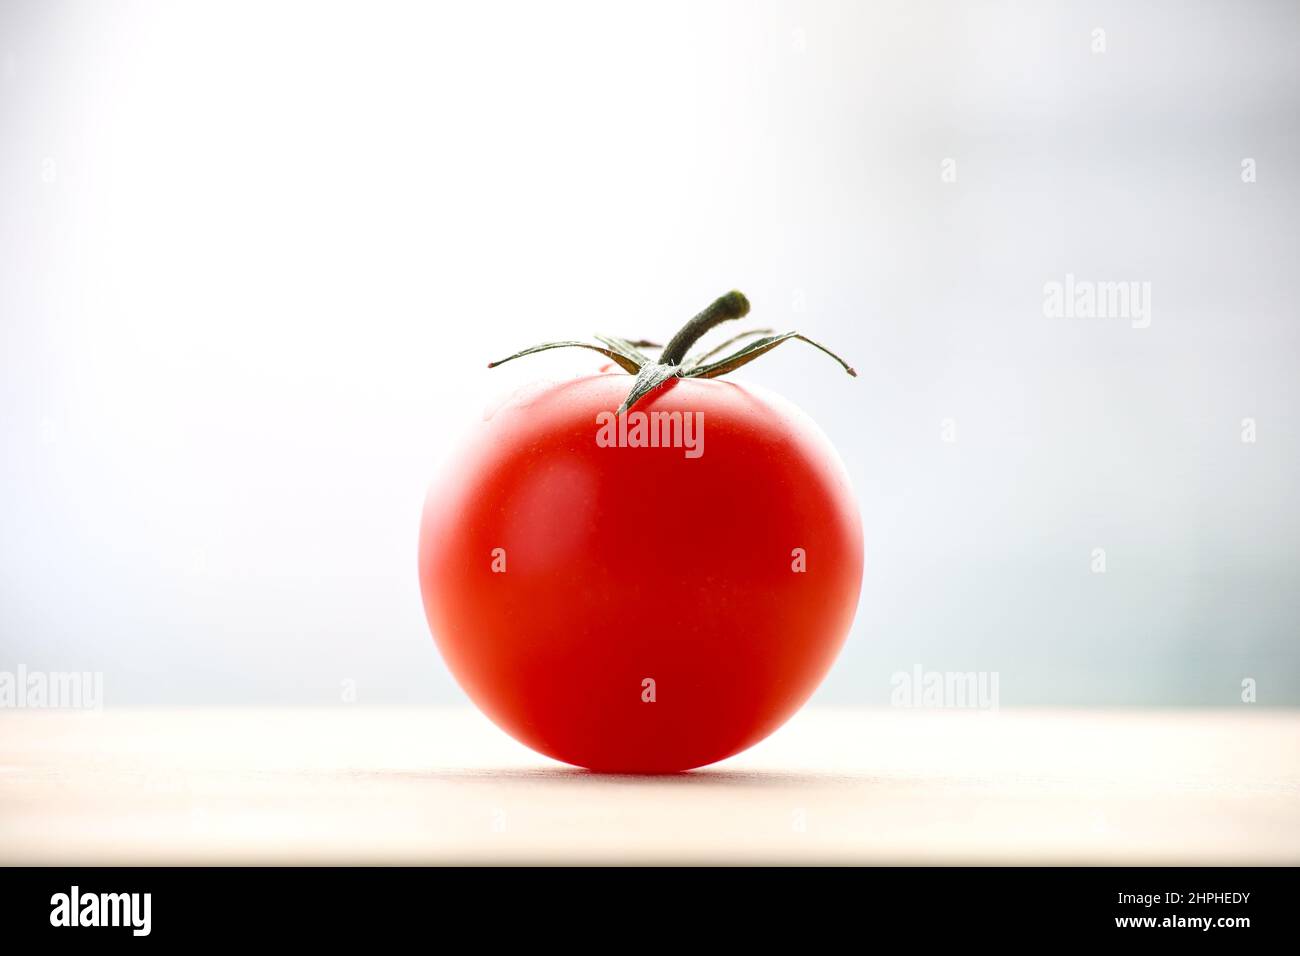 Fresh ripened red tomato on cutting board. Side view with bright bullred background. Stock Photo